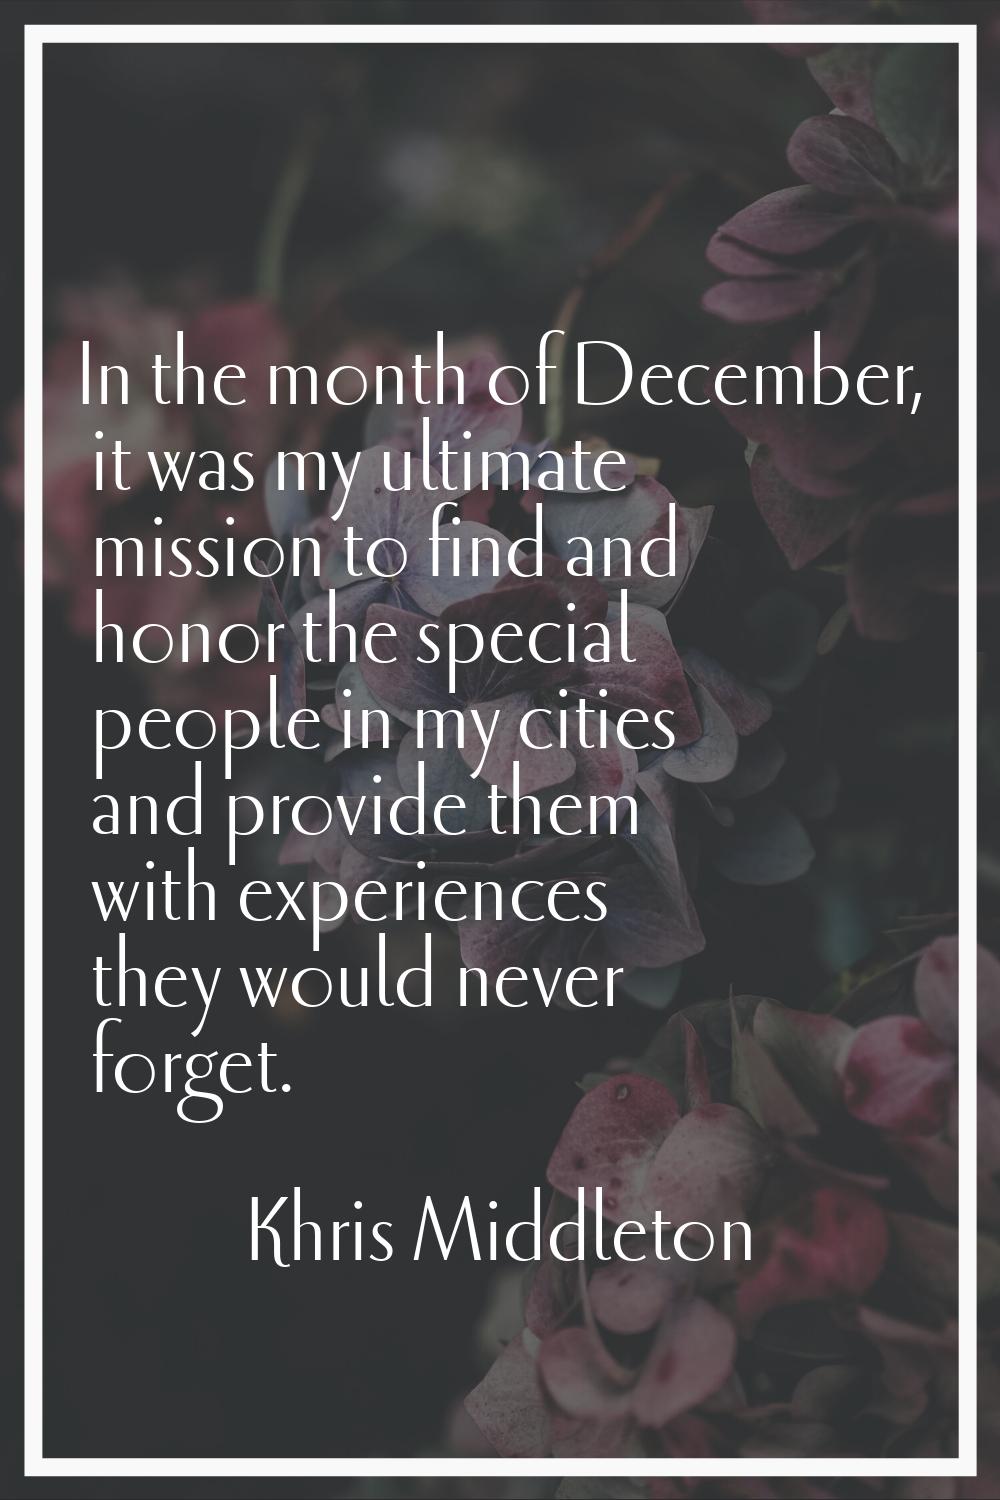 In the month of December, it was my ultimate mission to find and honor the special people in my cit